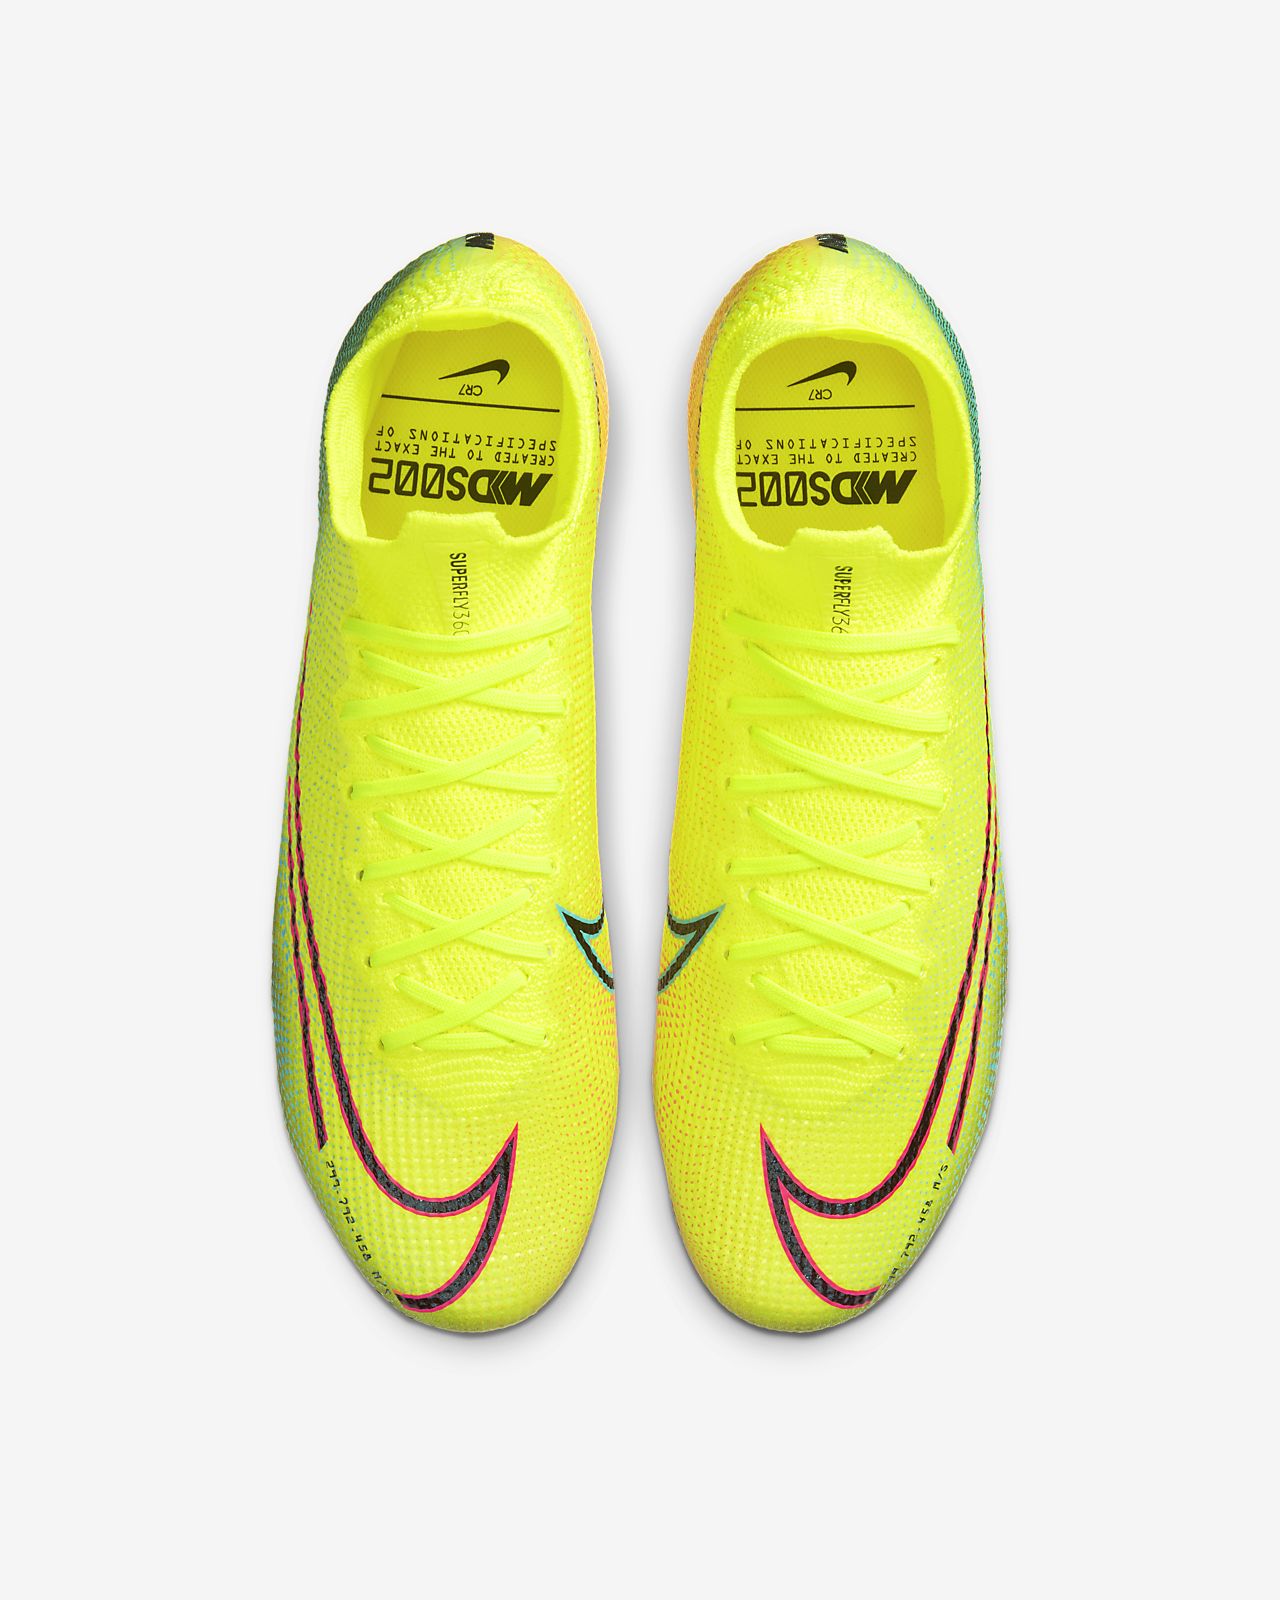 Nike Mercurial Superfly 7 Academy MDS IC Indoor Court.